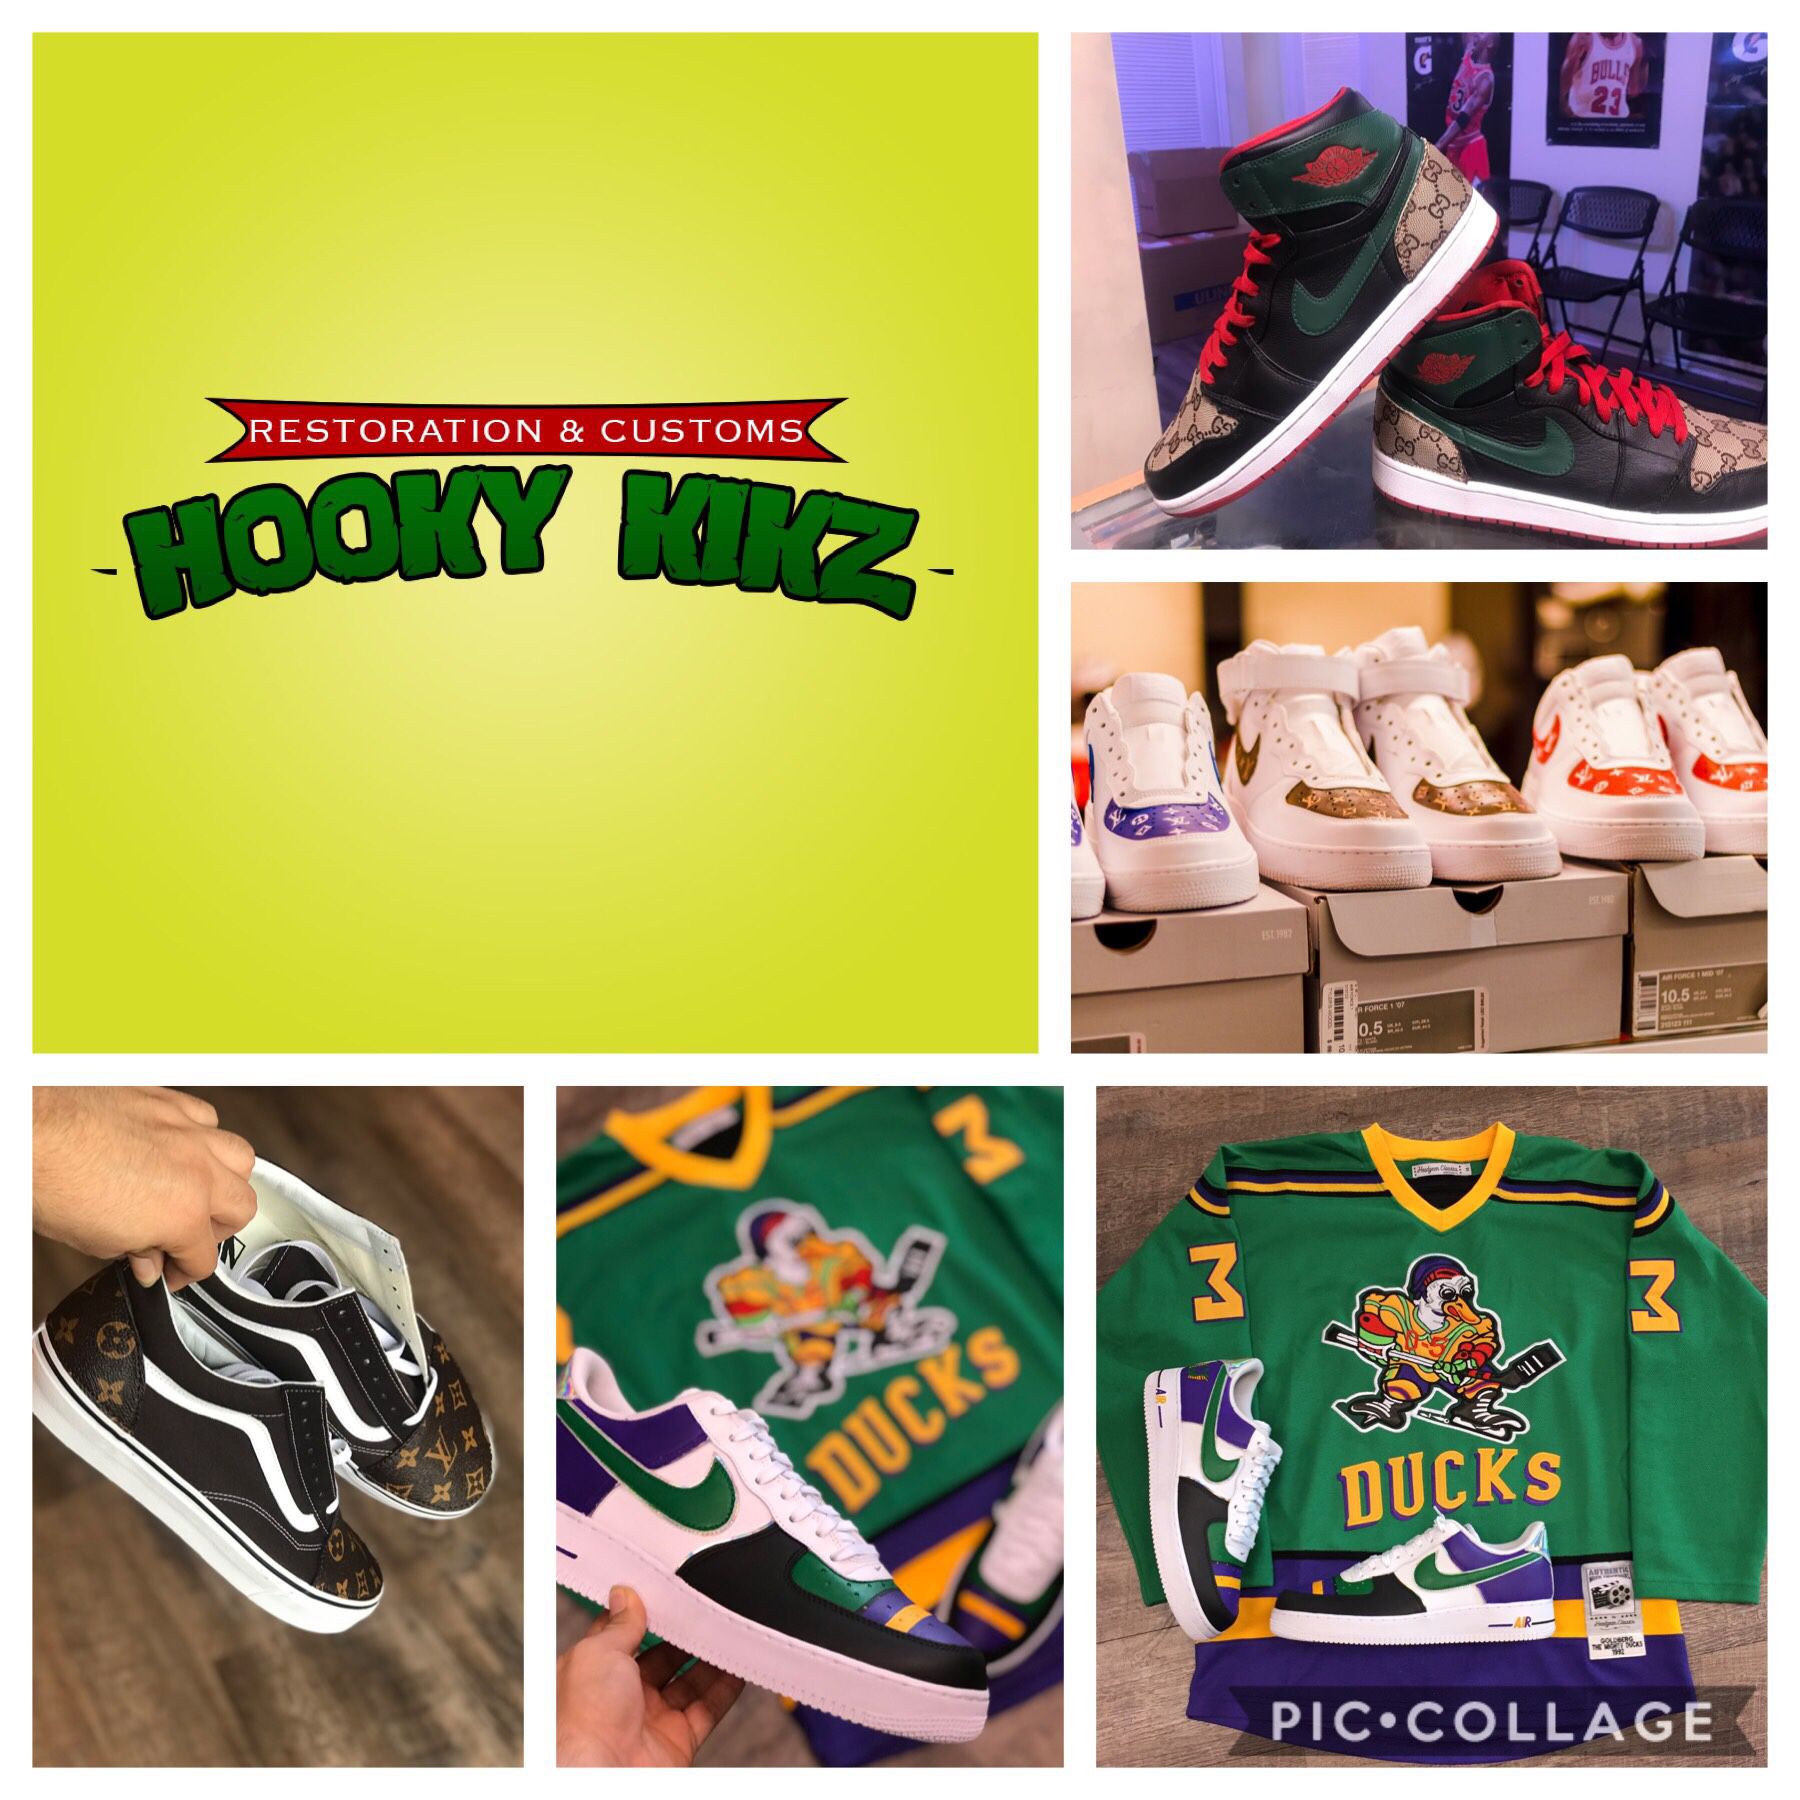 Hooky KiKz provides a wide range of services ranging from shoe and sneaker  cleaning services as well as sneaker restorations and customs. Located 4  for Sale in Mesquite, TX - OfferUp